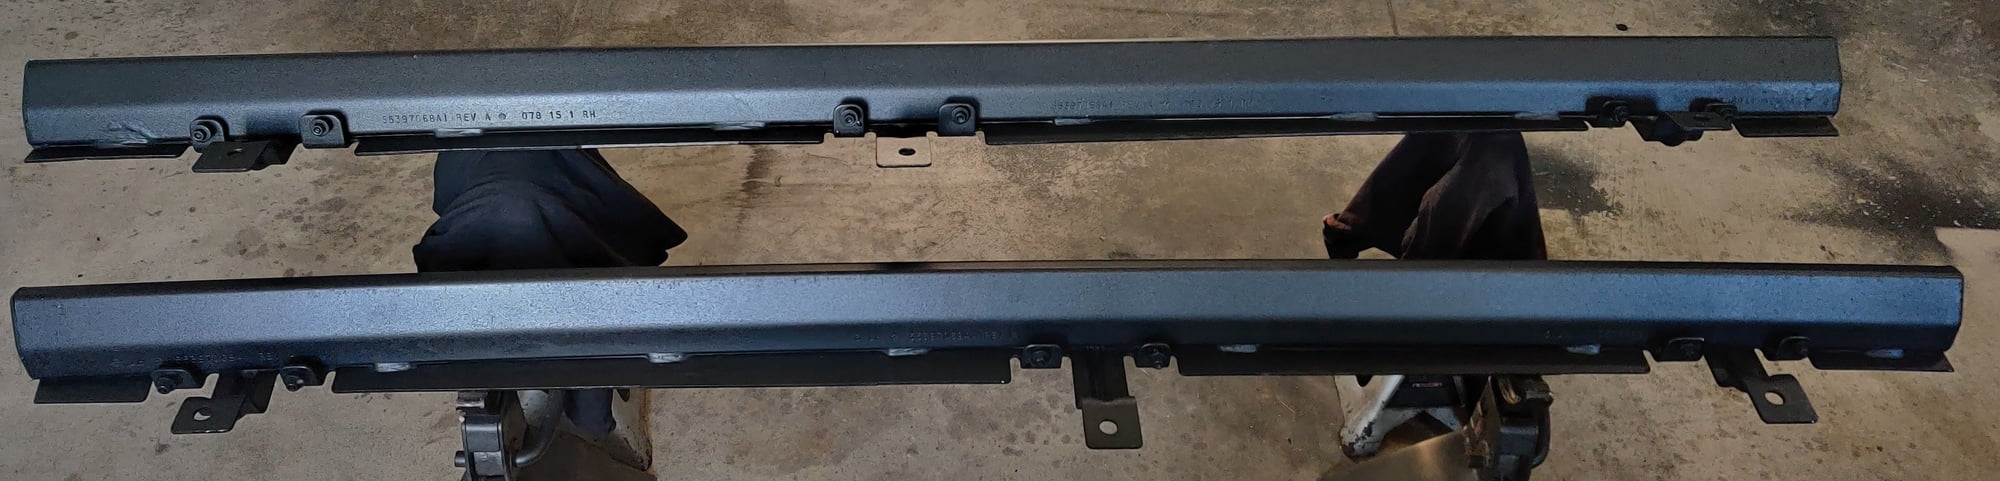 Accessories - Jeep JKU Factory Rock Rails - Used - 2007 to 2018 Jeep Wrangler - Hartville, OH 44632, United States